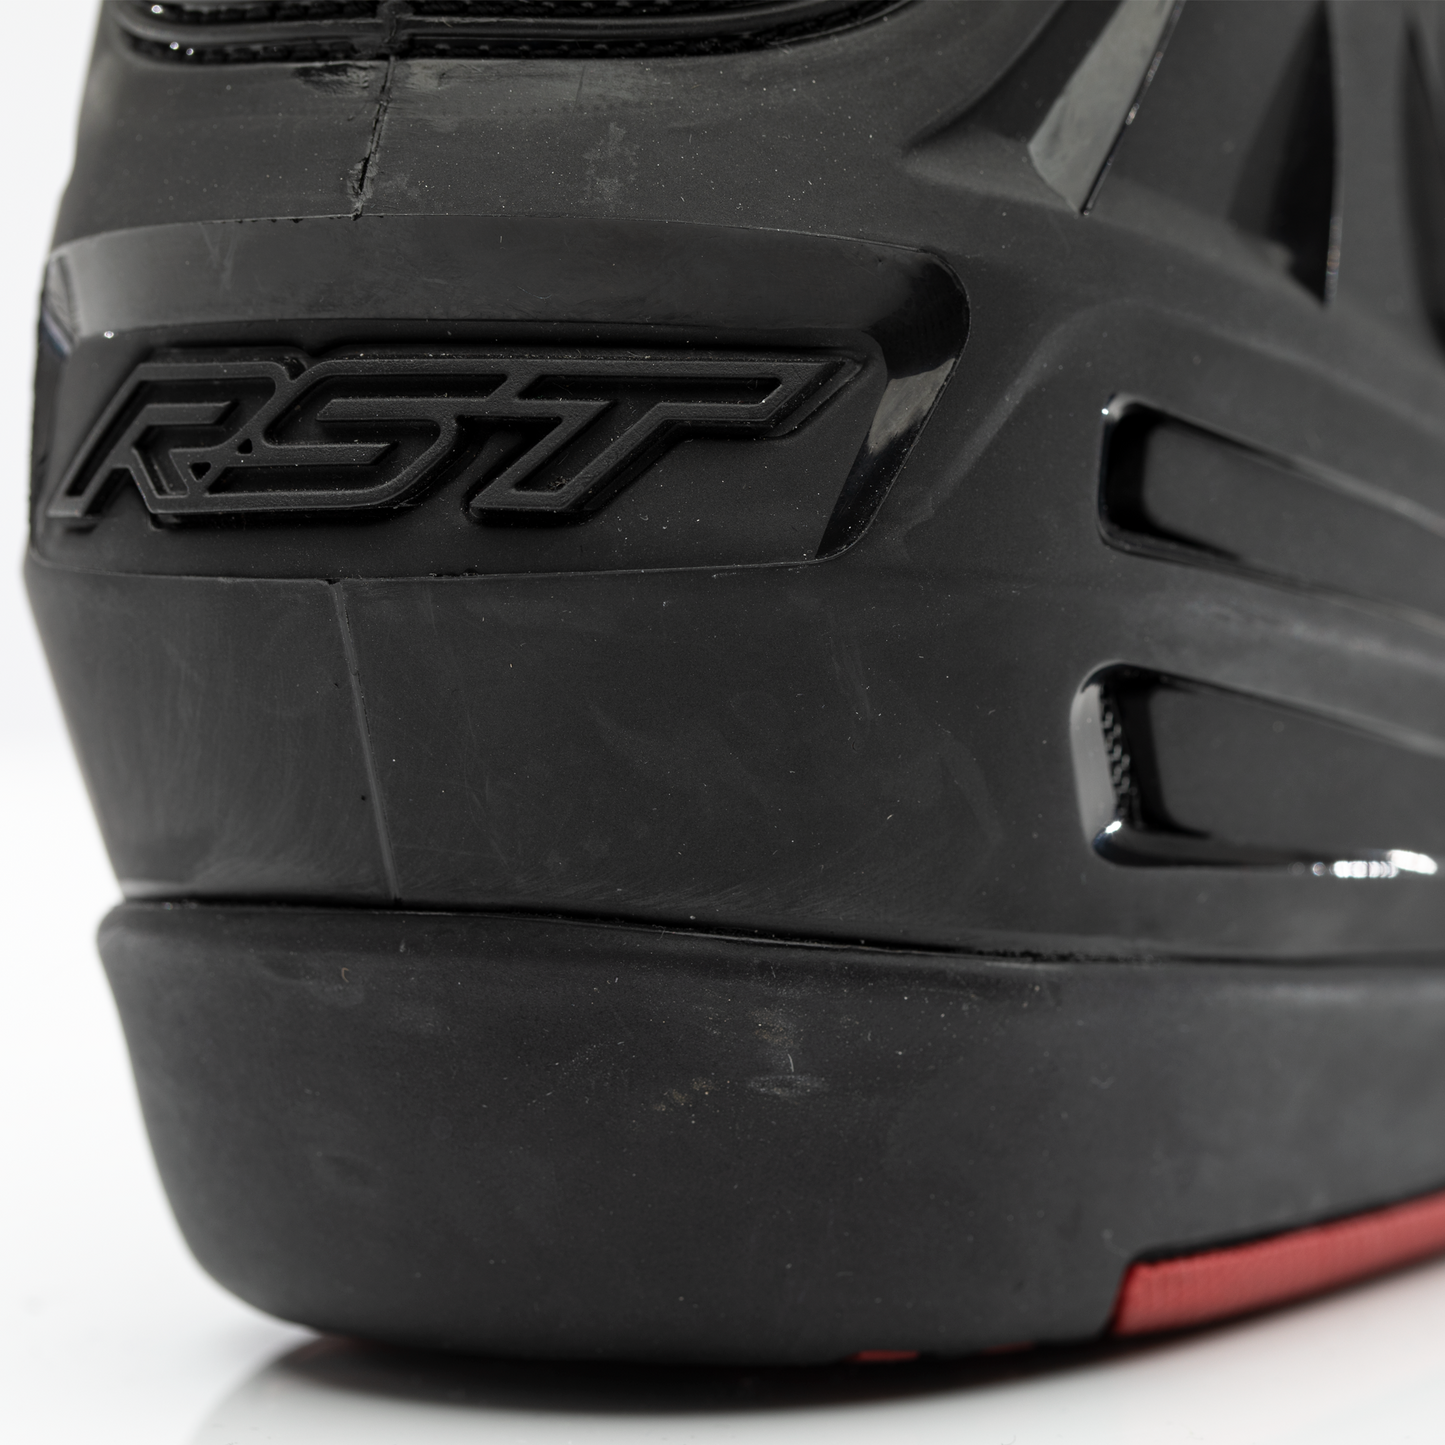 RST Tractech Evo III 3 Short Boots - CE APPROVED - Black/White